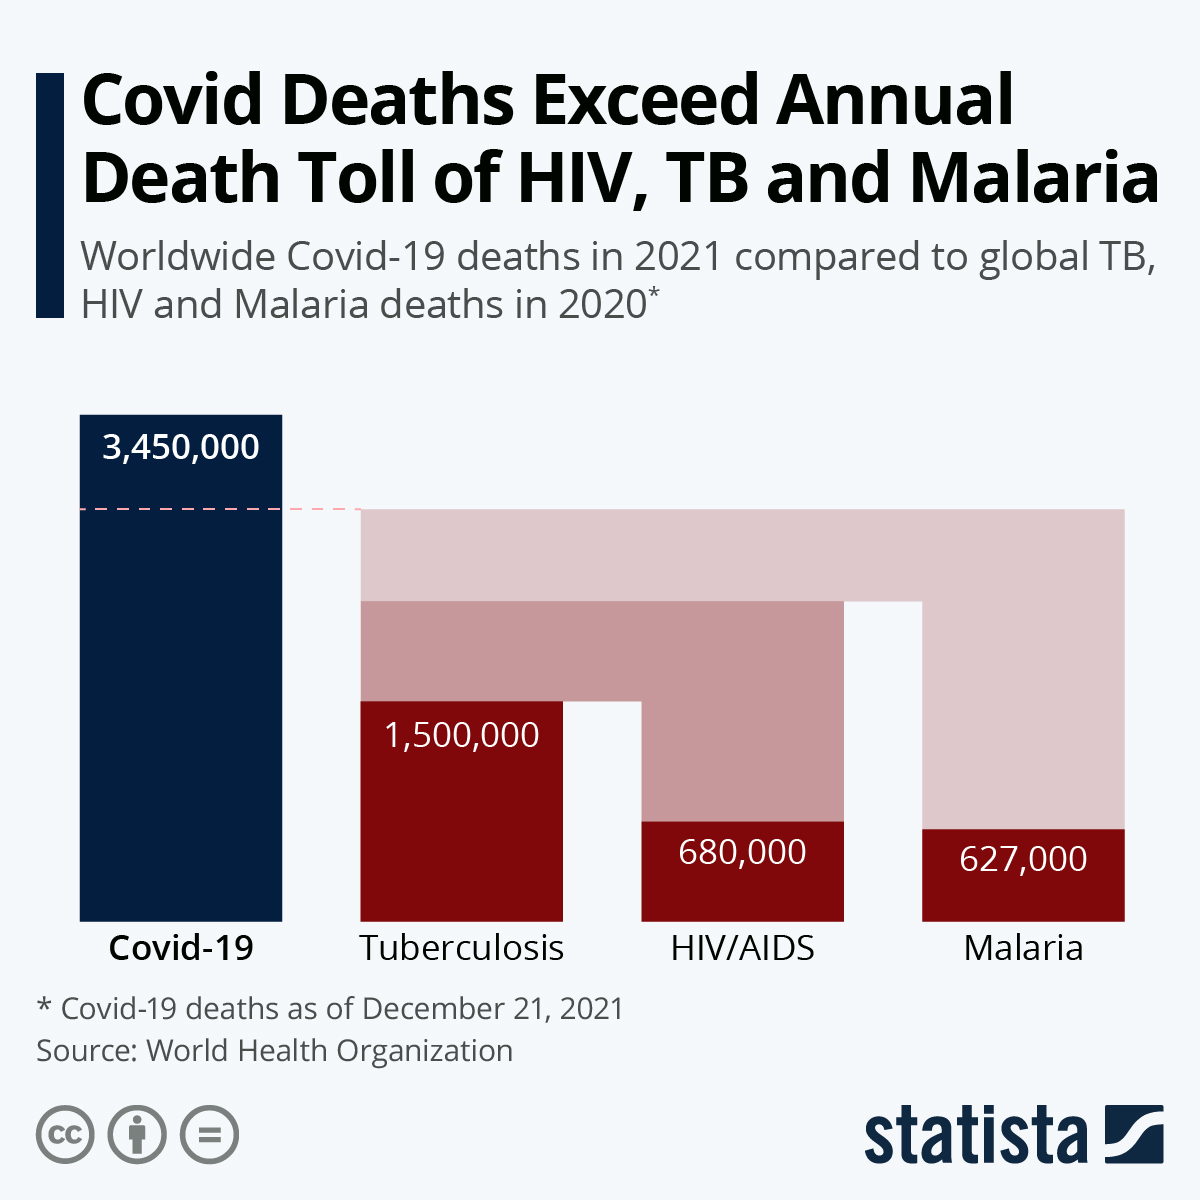 Covid Deaths Exceed Annual Death Toll of HIV, TB and Malaria